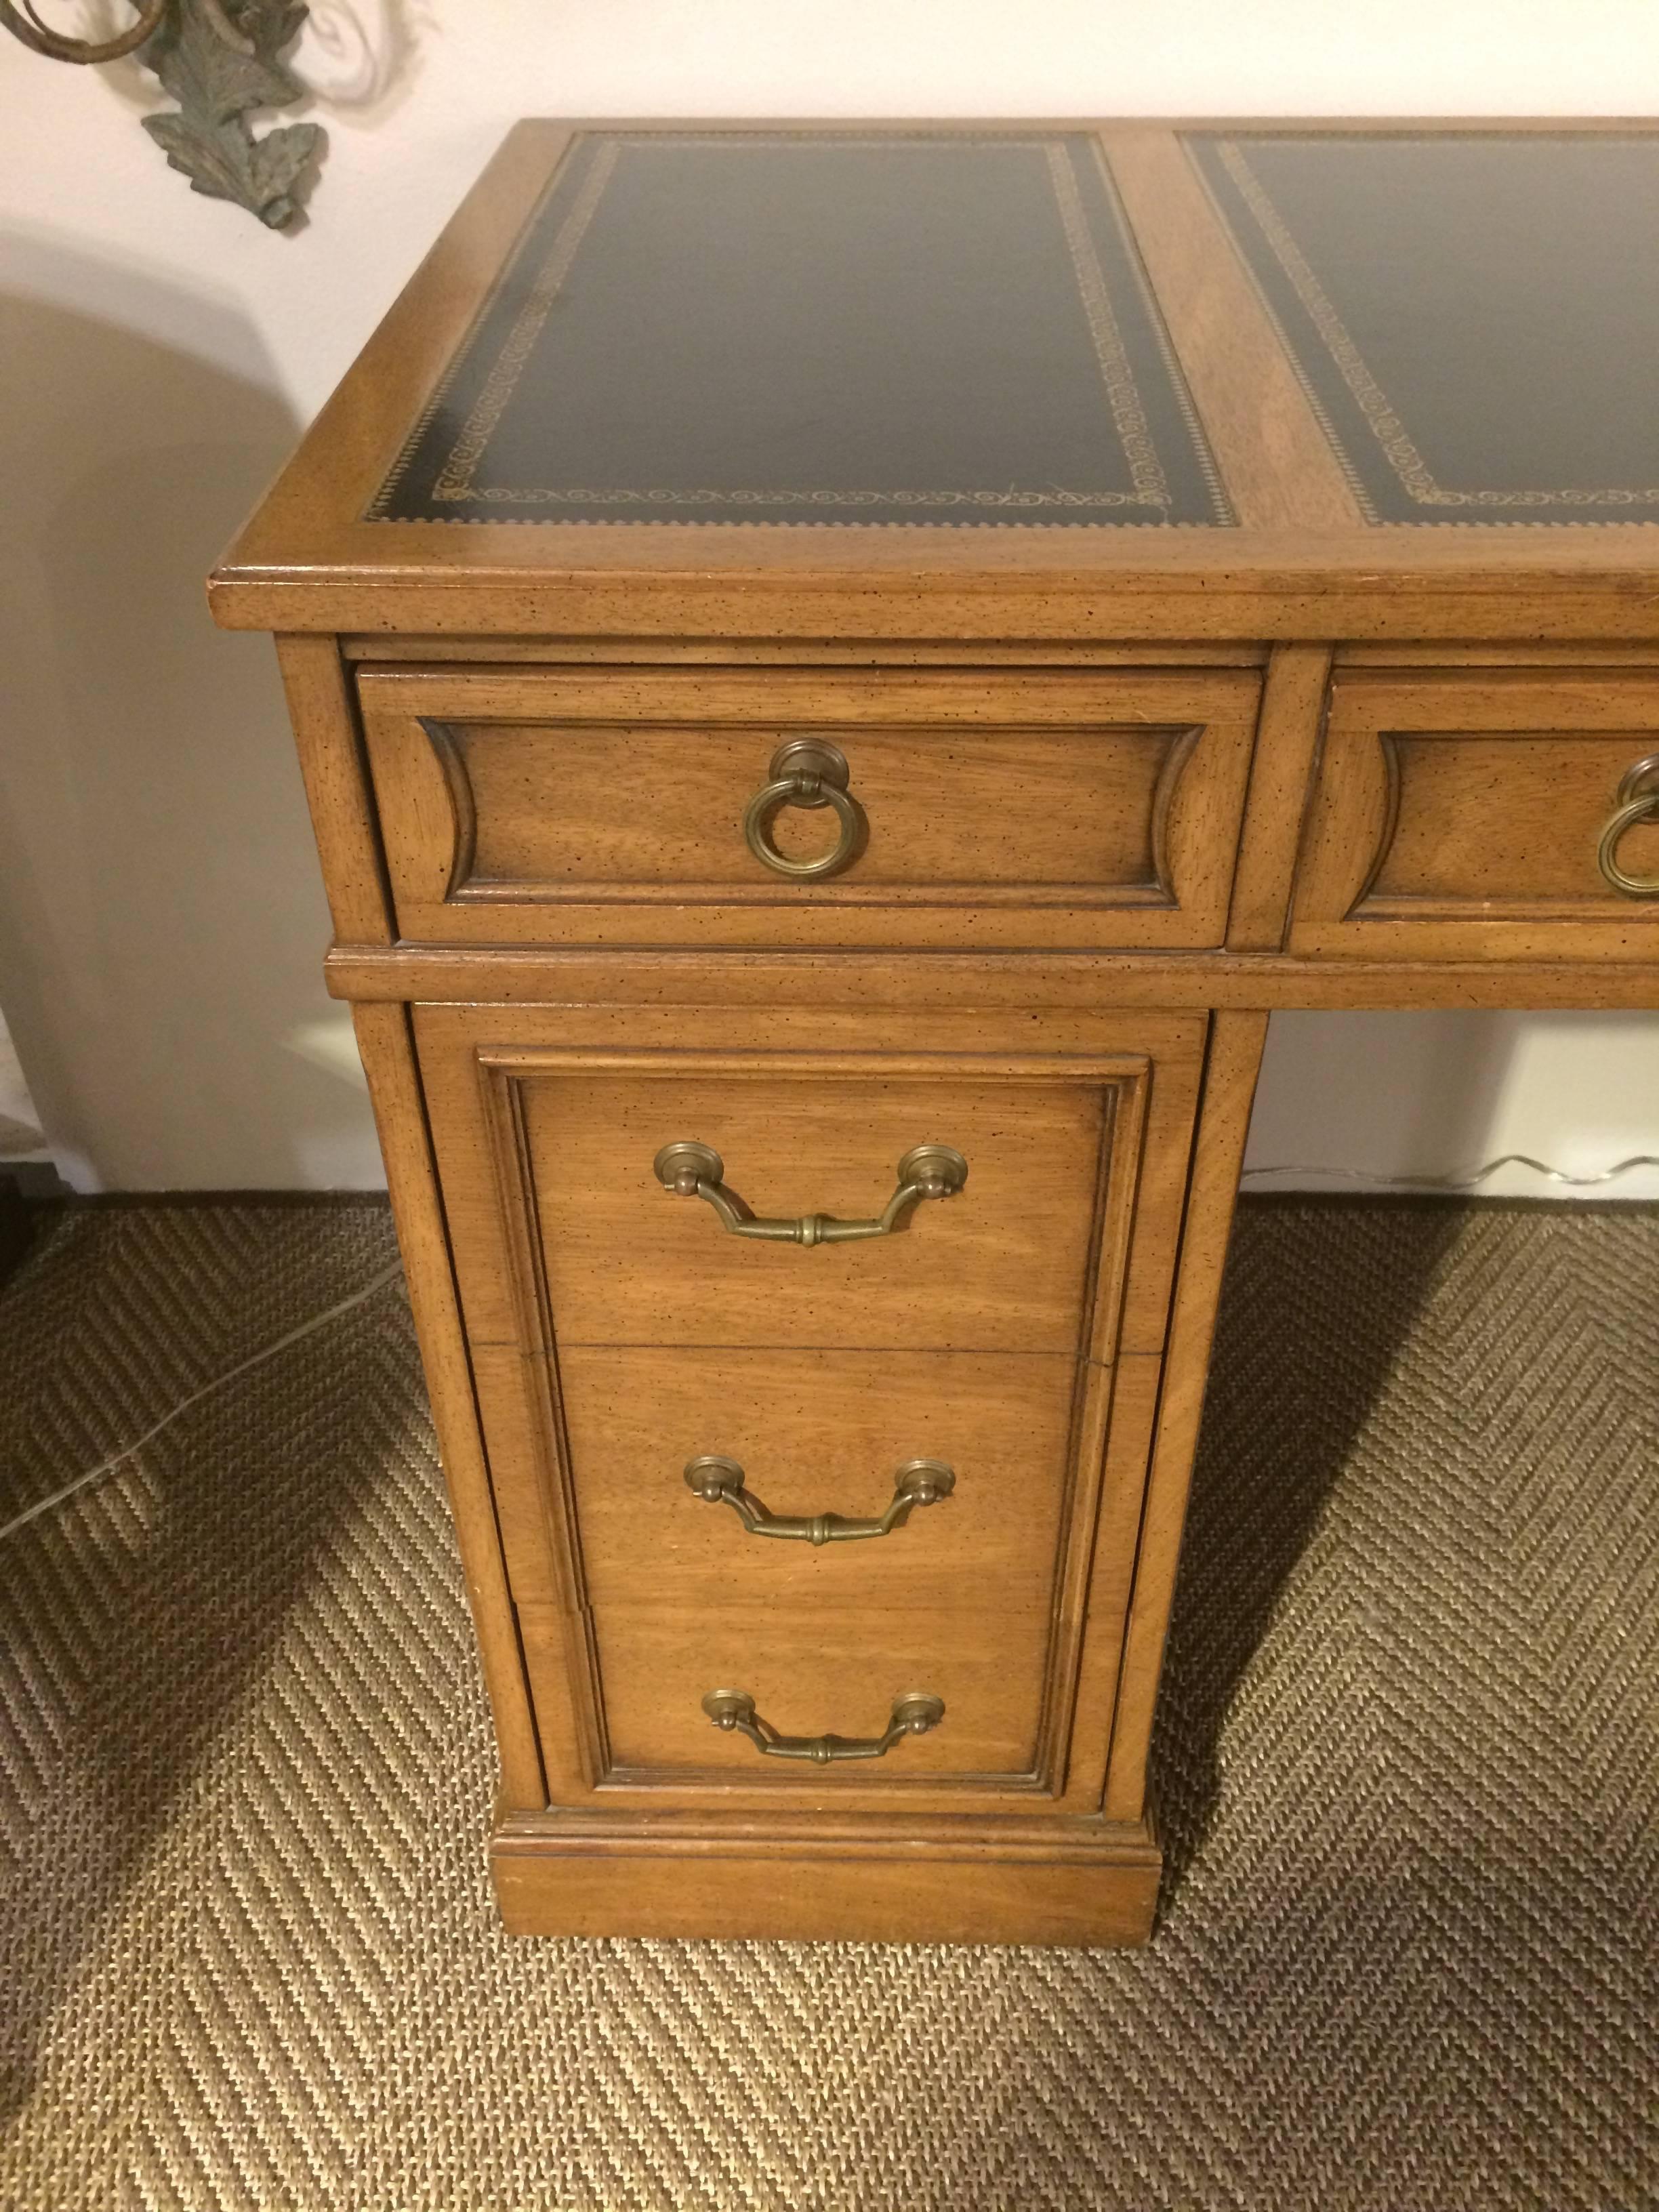 American Wonderful Medium Sized Desk with Tooled Leather Top